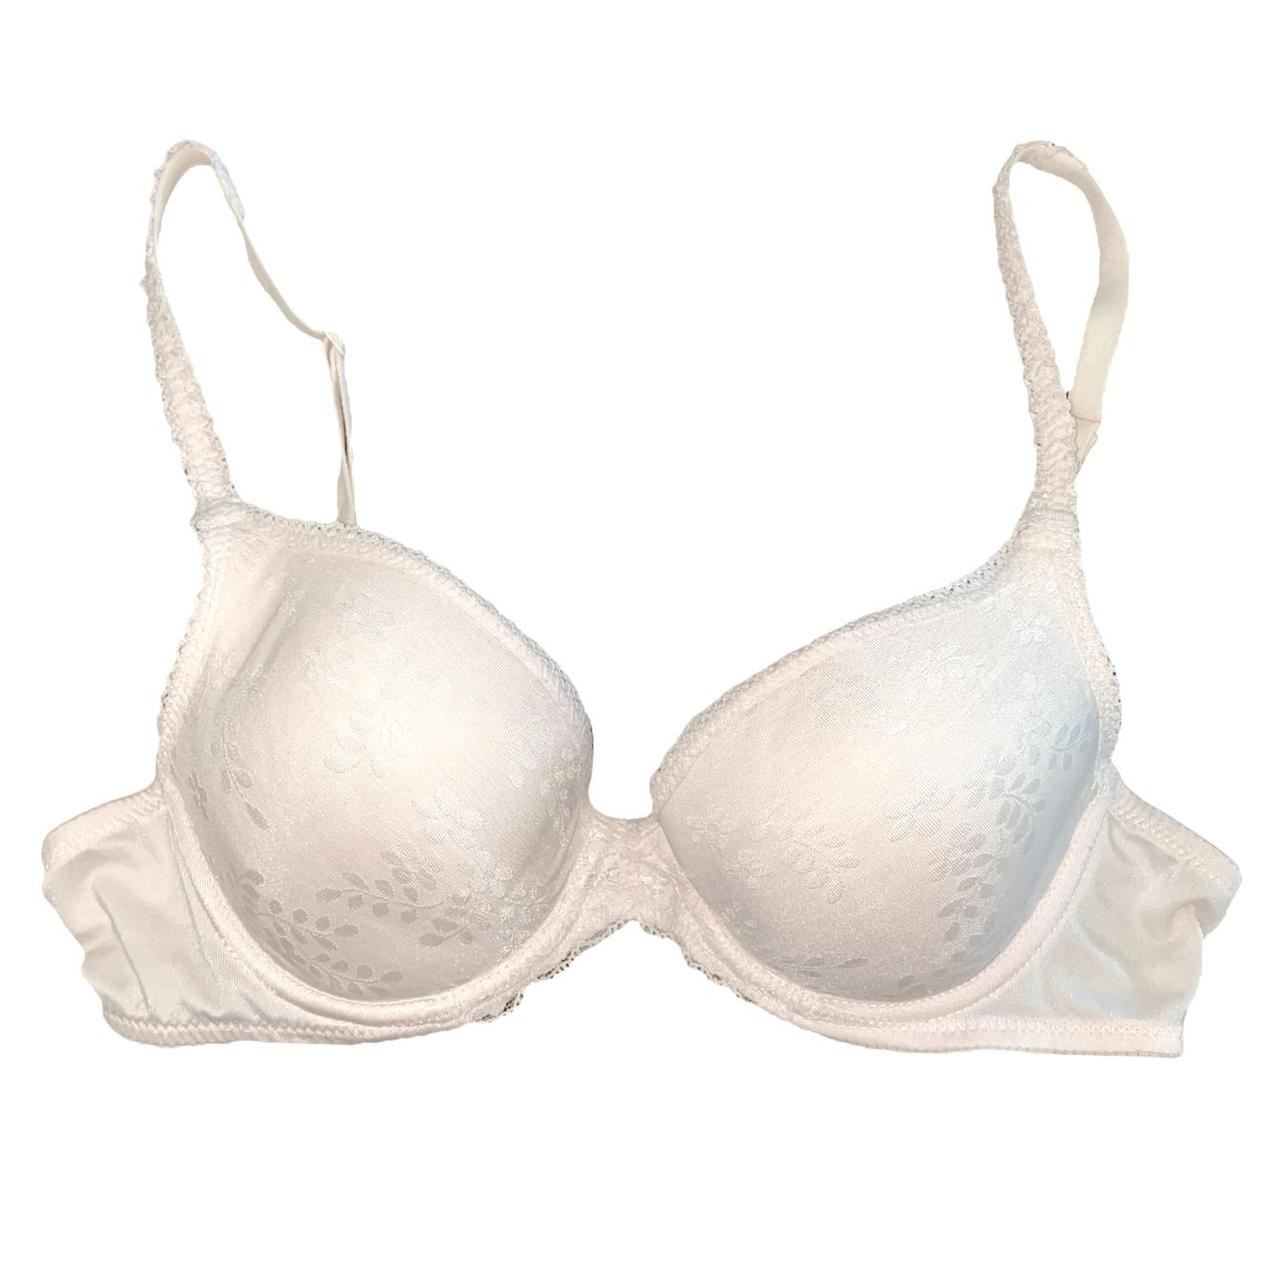 Product Image 1 - VINTAGE MAIDENFORM SOFT PINK/NUDE PADDED